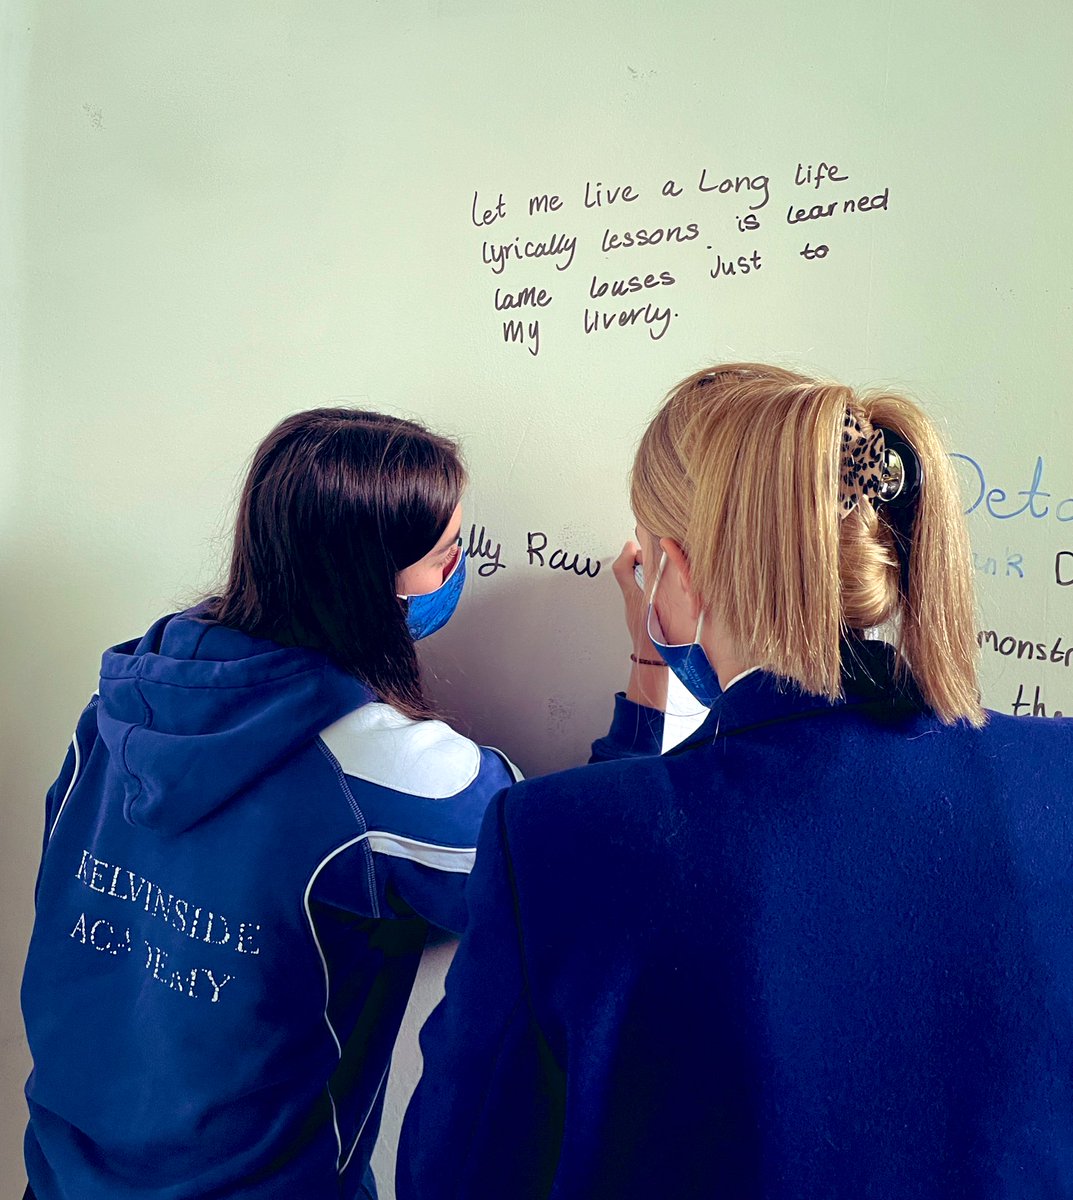 Senior 3 @KA_EnglishDept pupils practise recall techniques in the library by writing out from memory lyrics they’ve learned for a class project. Now can you say it faster? @blackalicious_ #learningthroughplay #collaboration #innovation #rapmusic